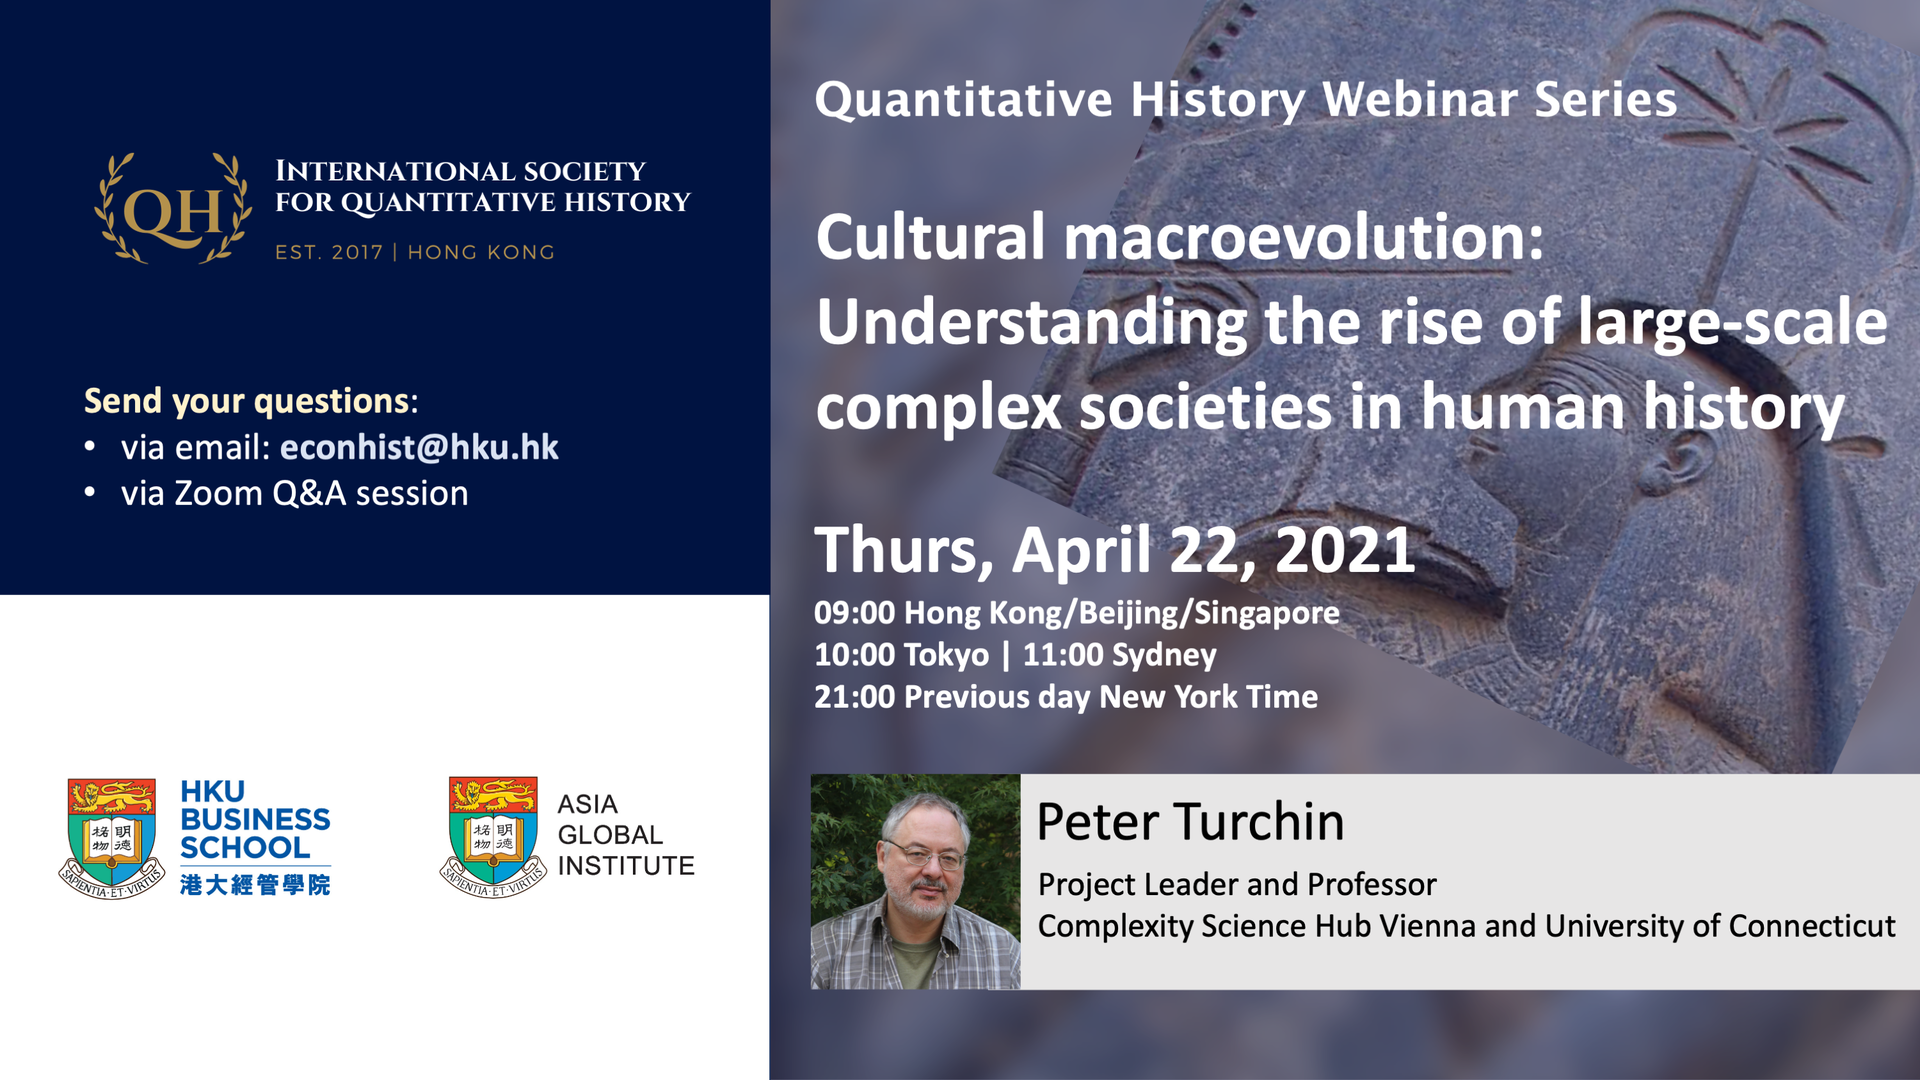 Quantitative History Webinar Series - Cultural macroevolution: Understanding the rise of large-scale complex societies in human history  